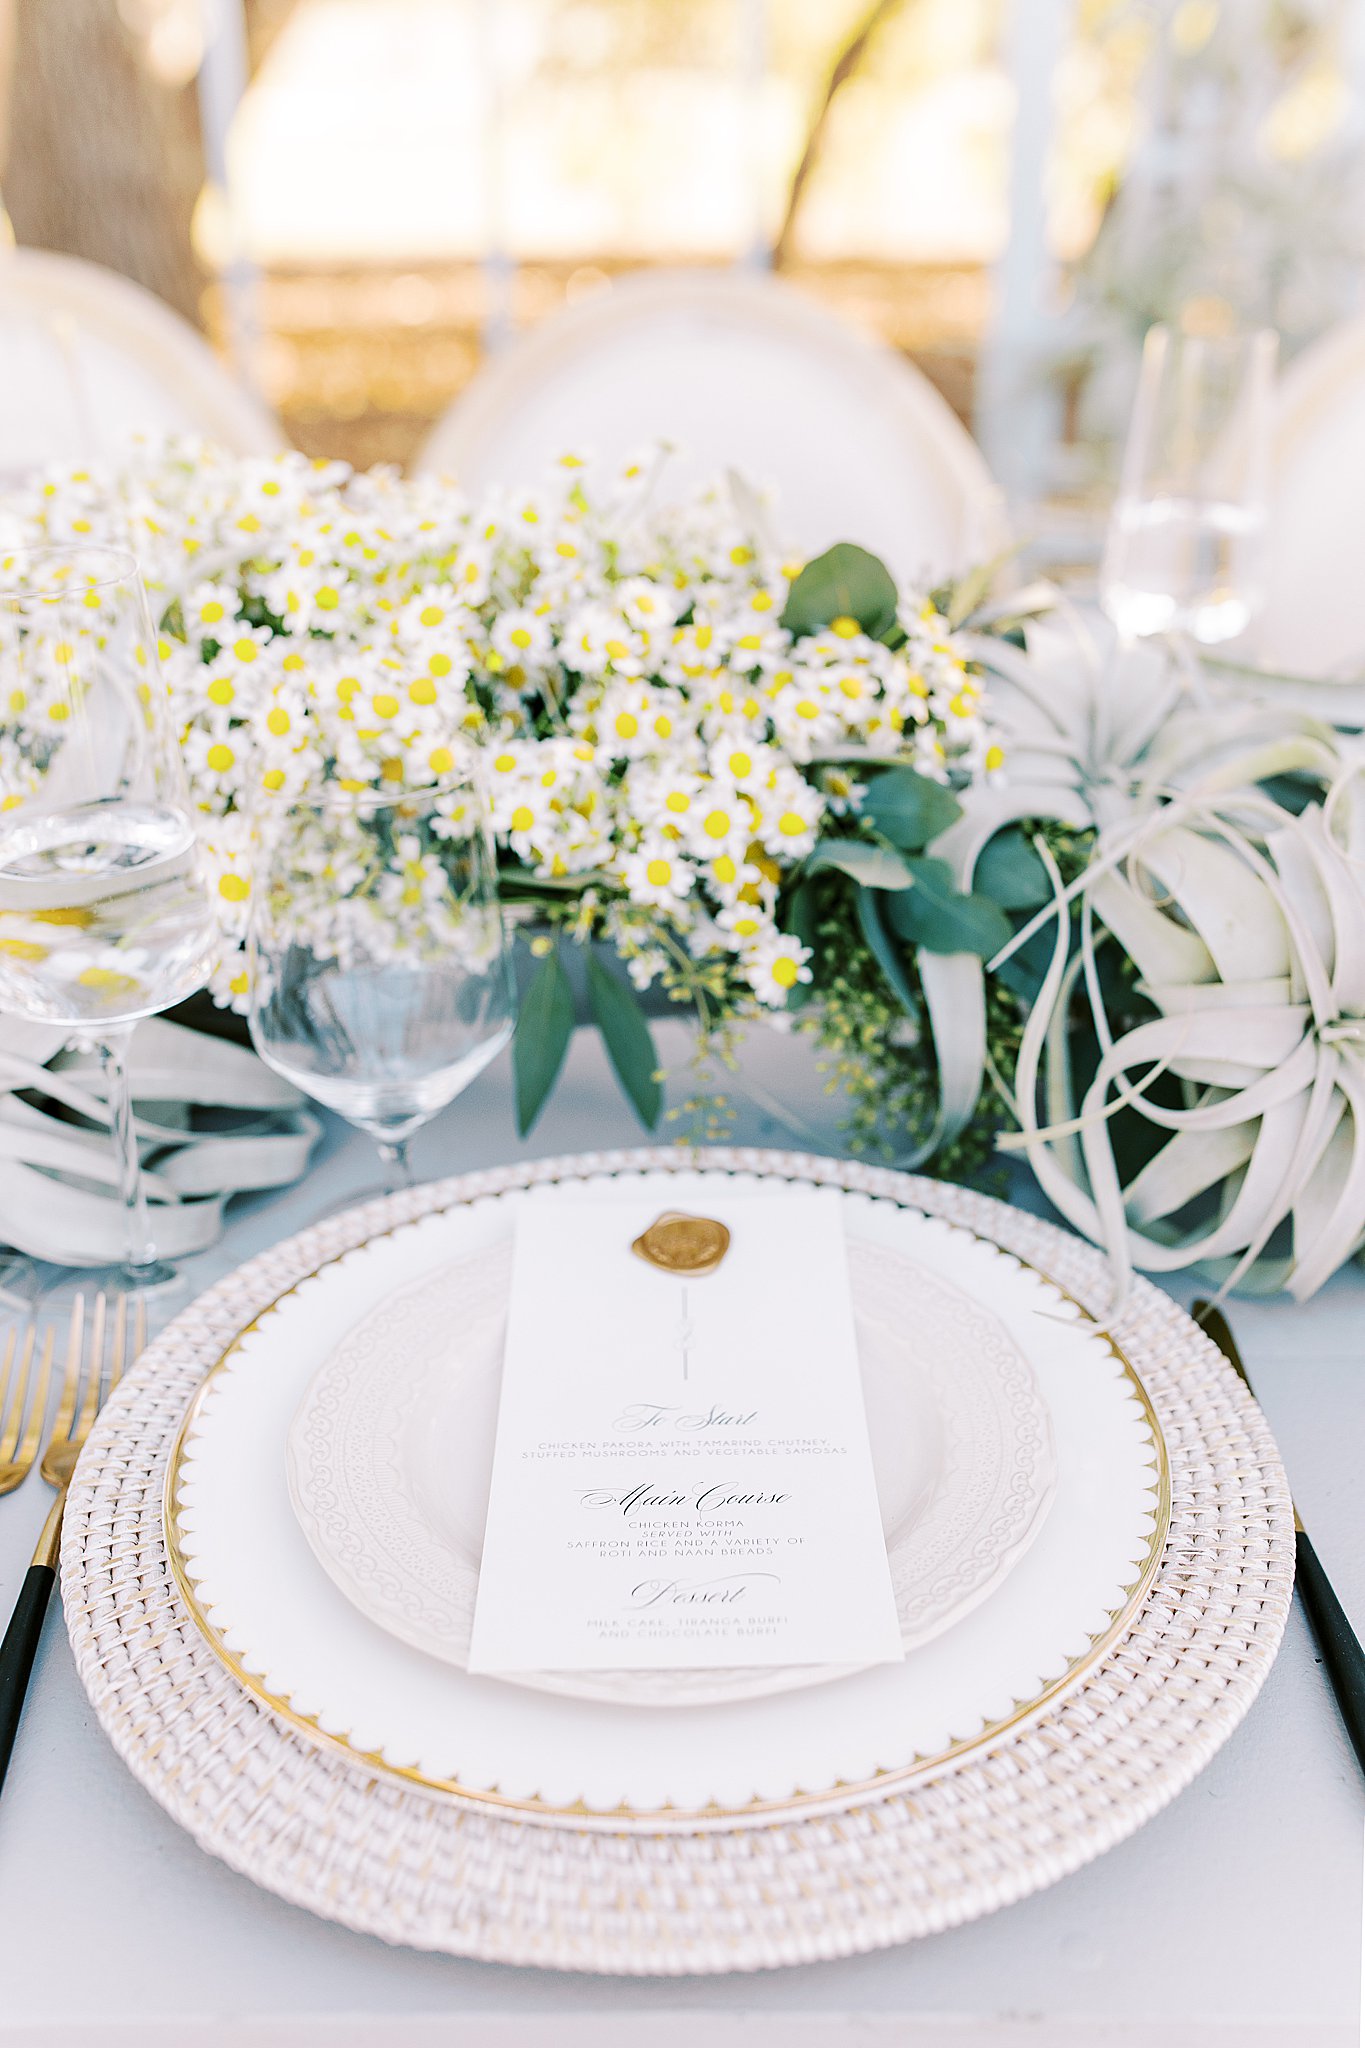 Gold, white, silver, succulents and china table display wedding